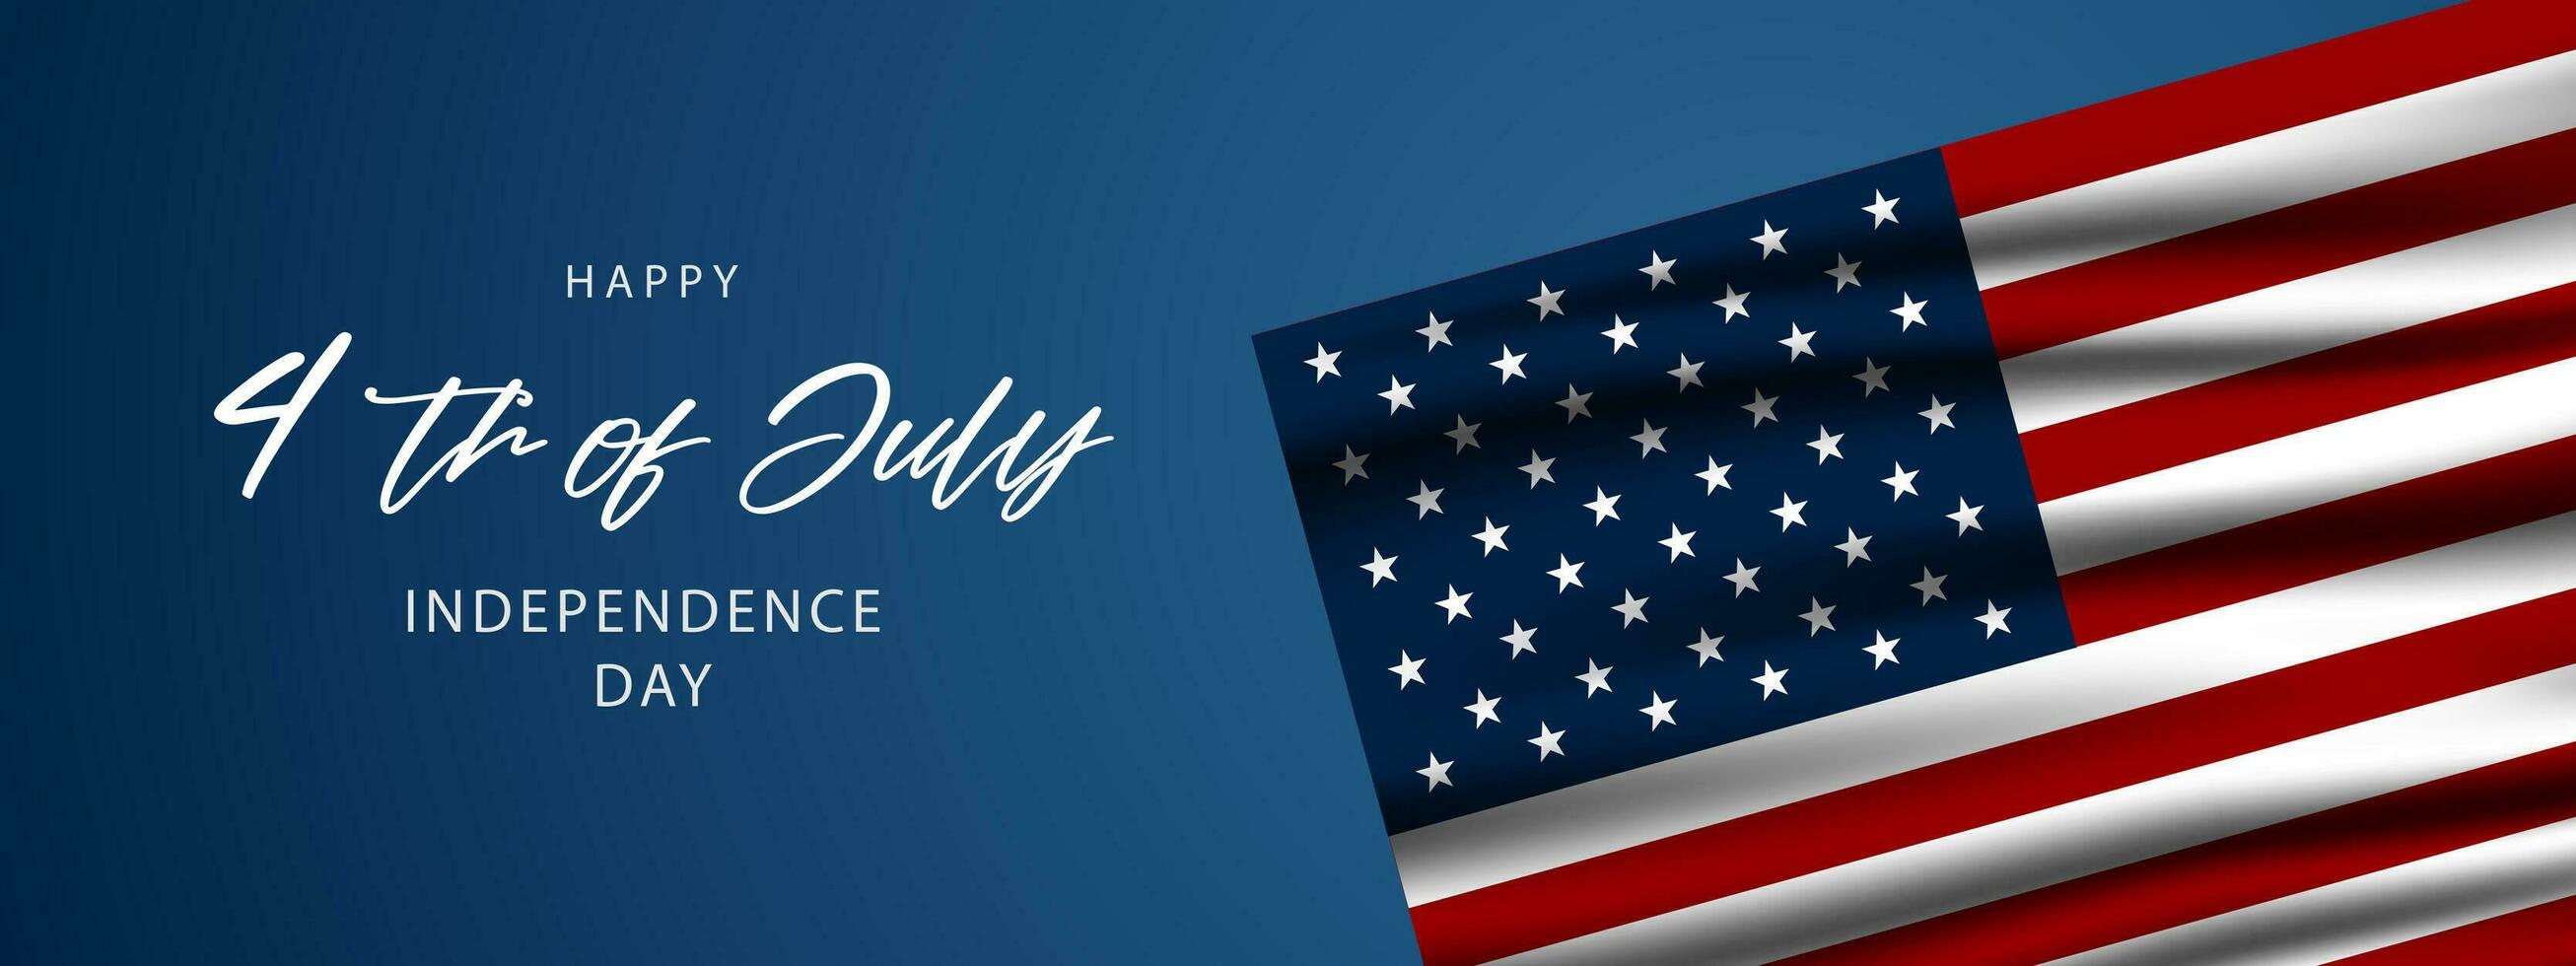 Happy Fourth of July Independence day USA Background Design vector